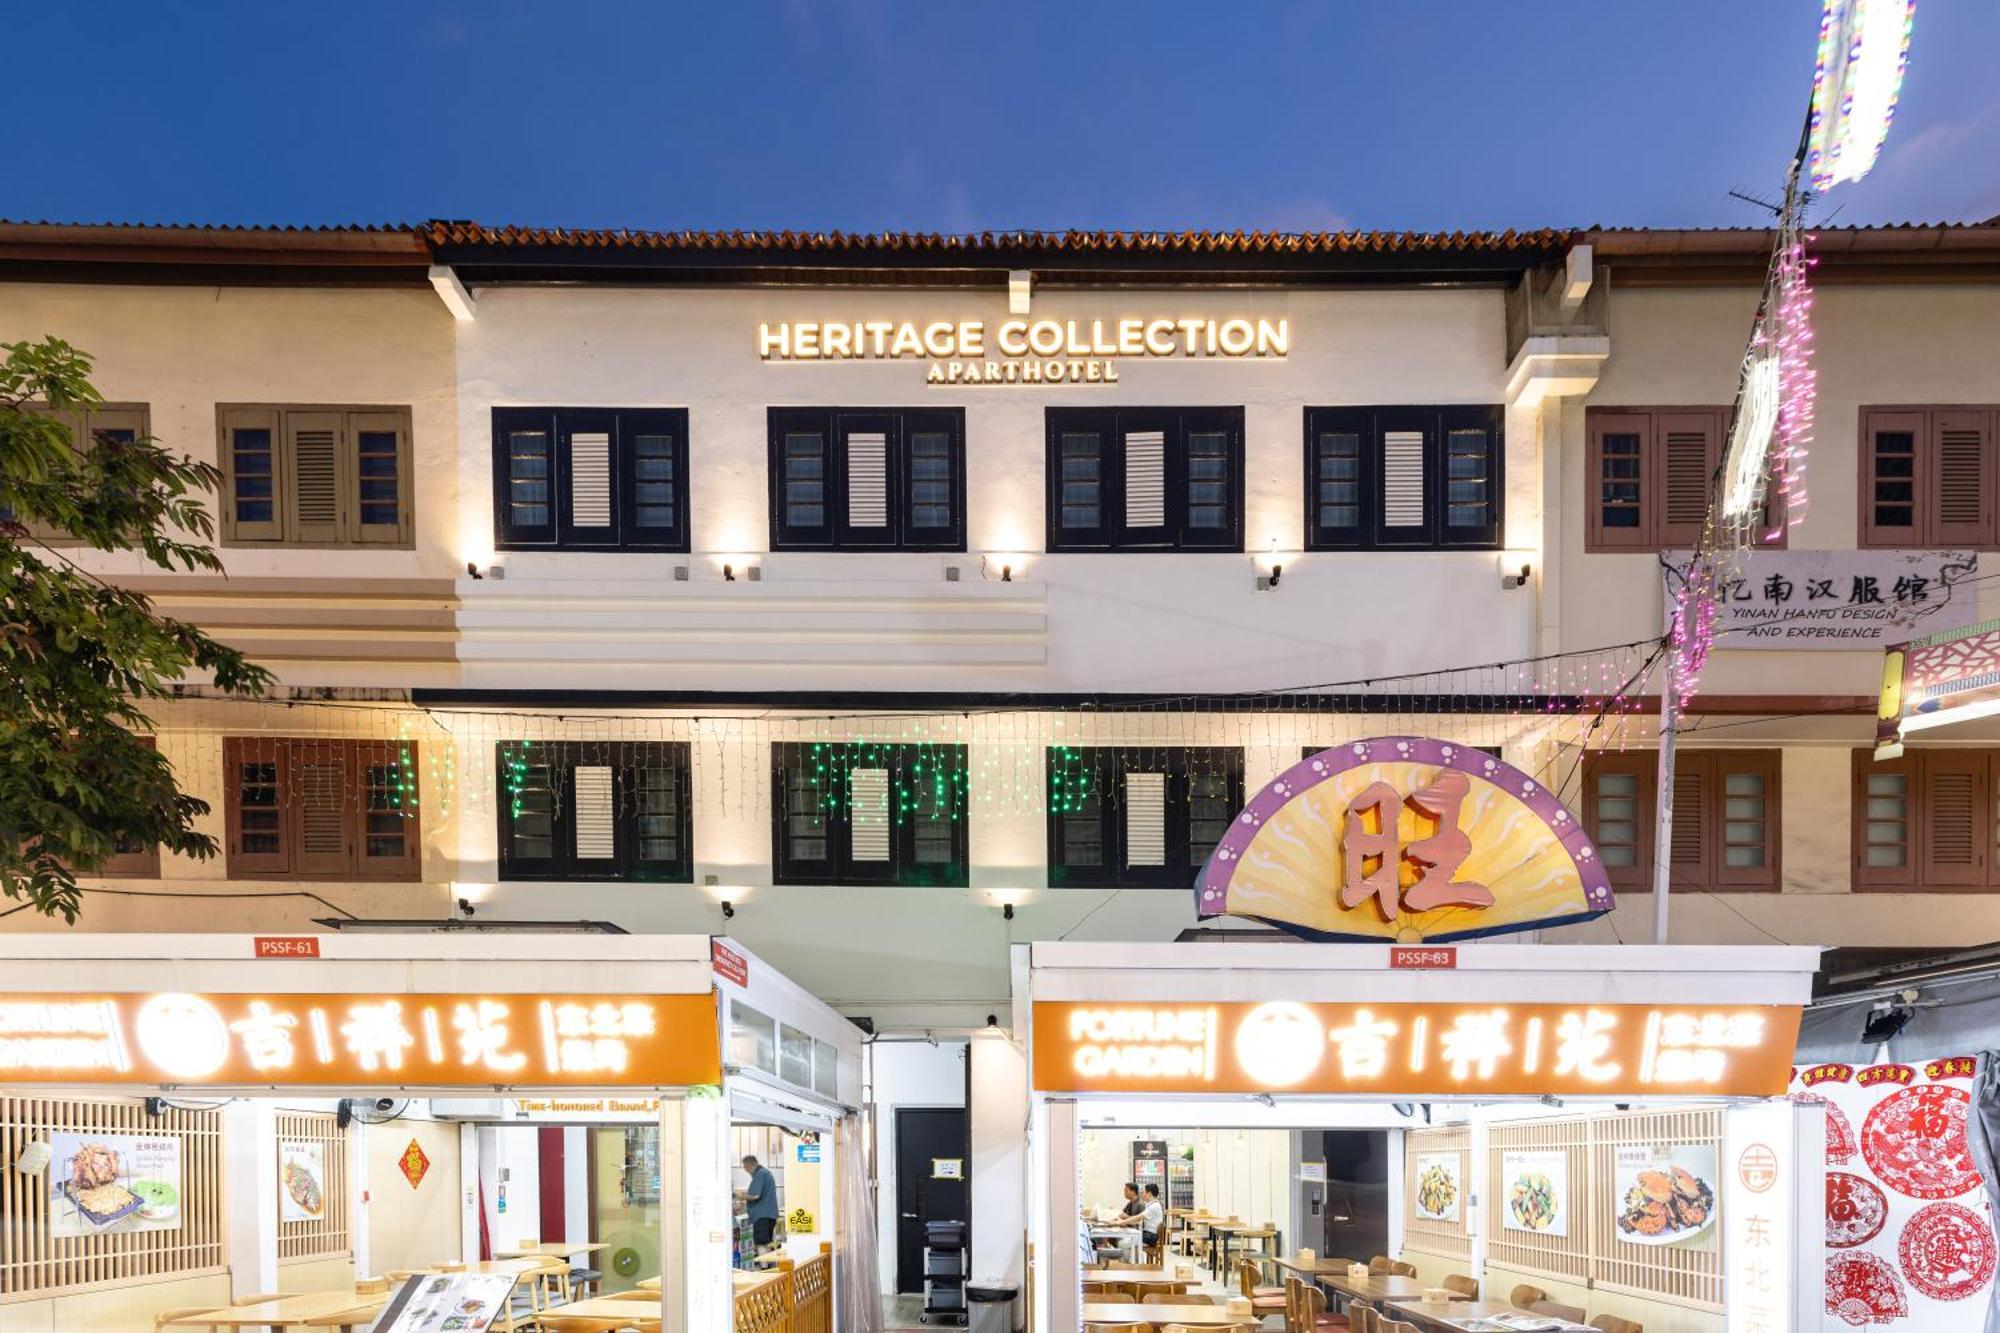 Heritage Collection On Pagoda - A Digital Hotel Singapore Esterno foto